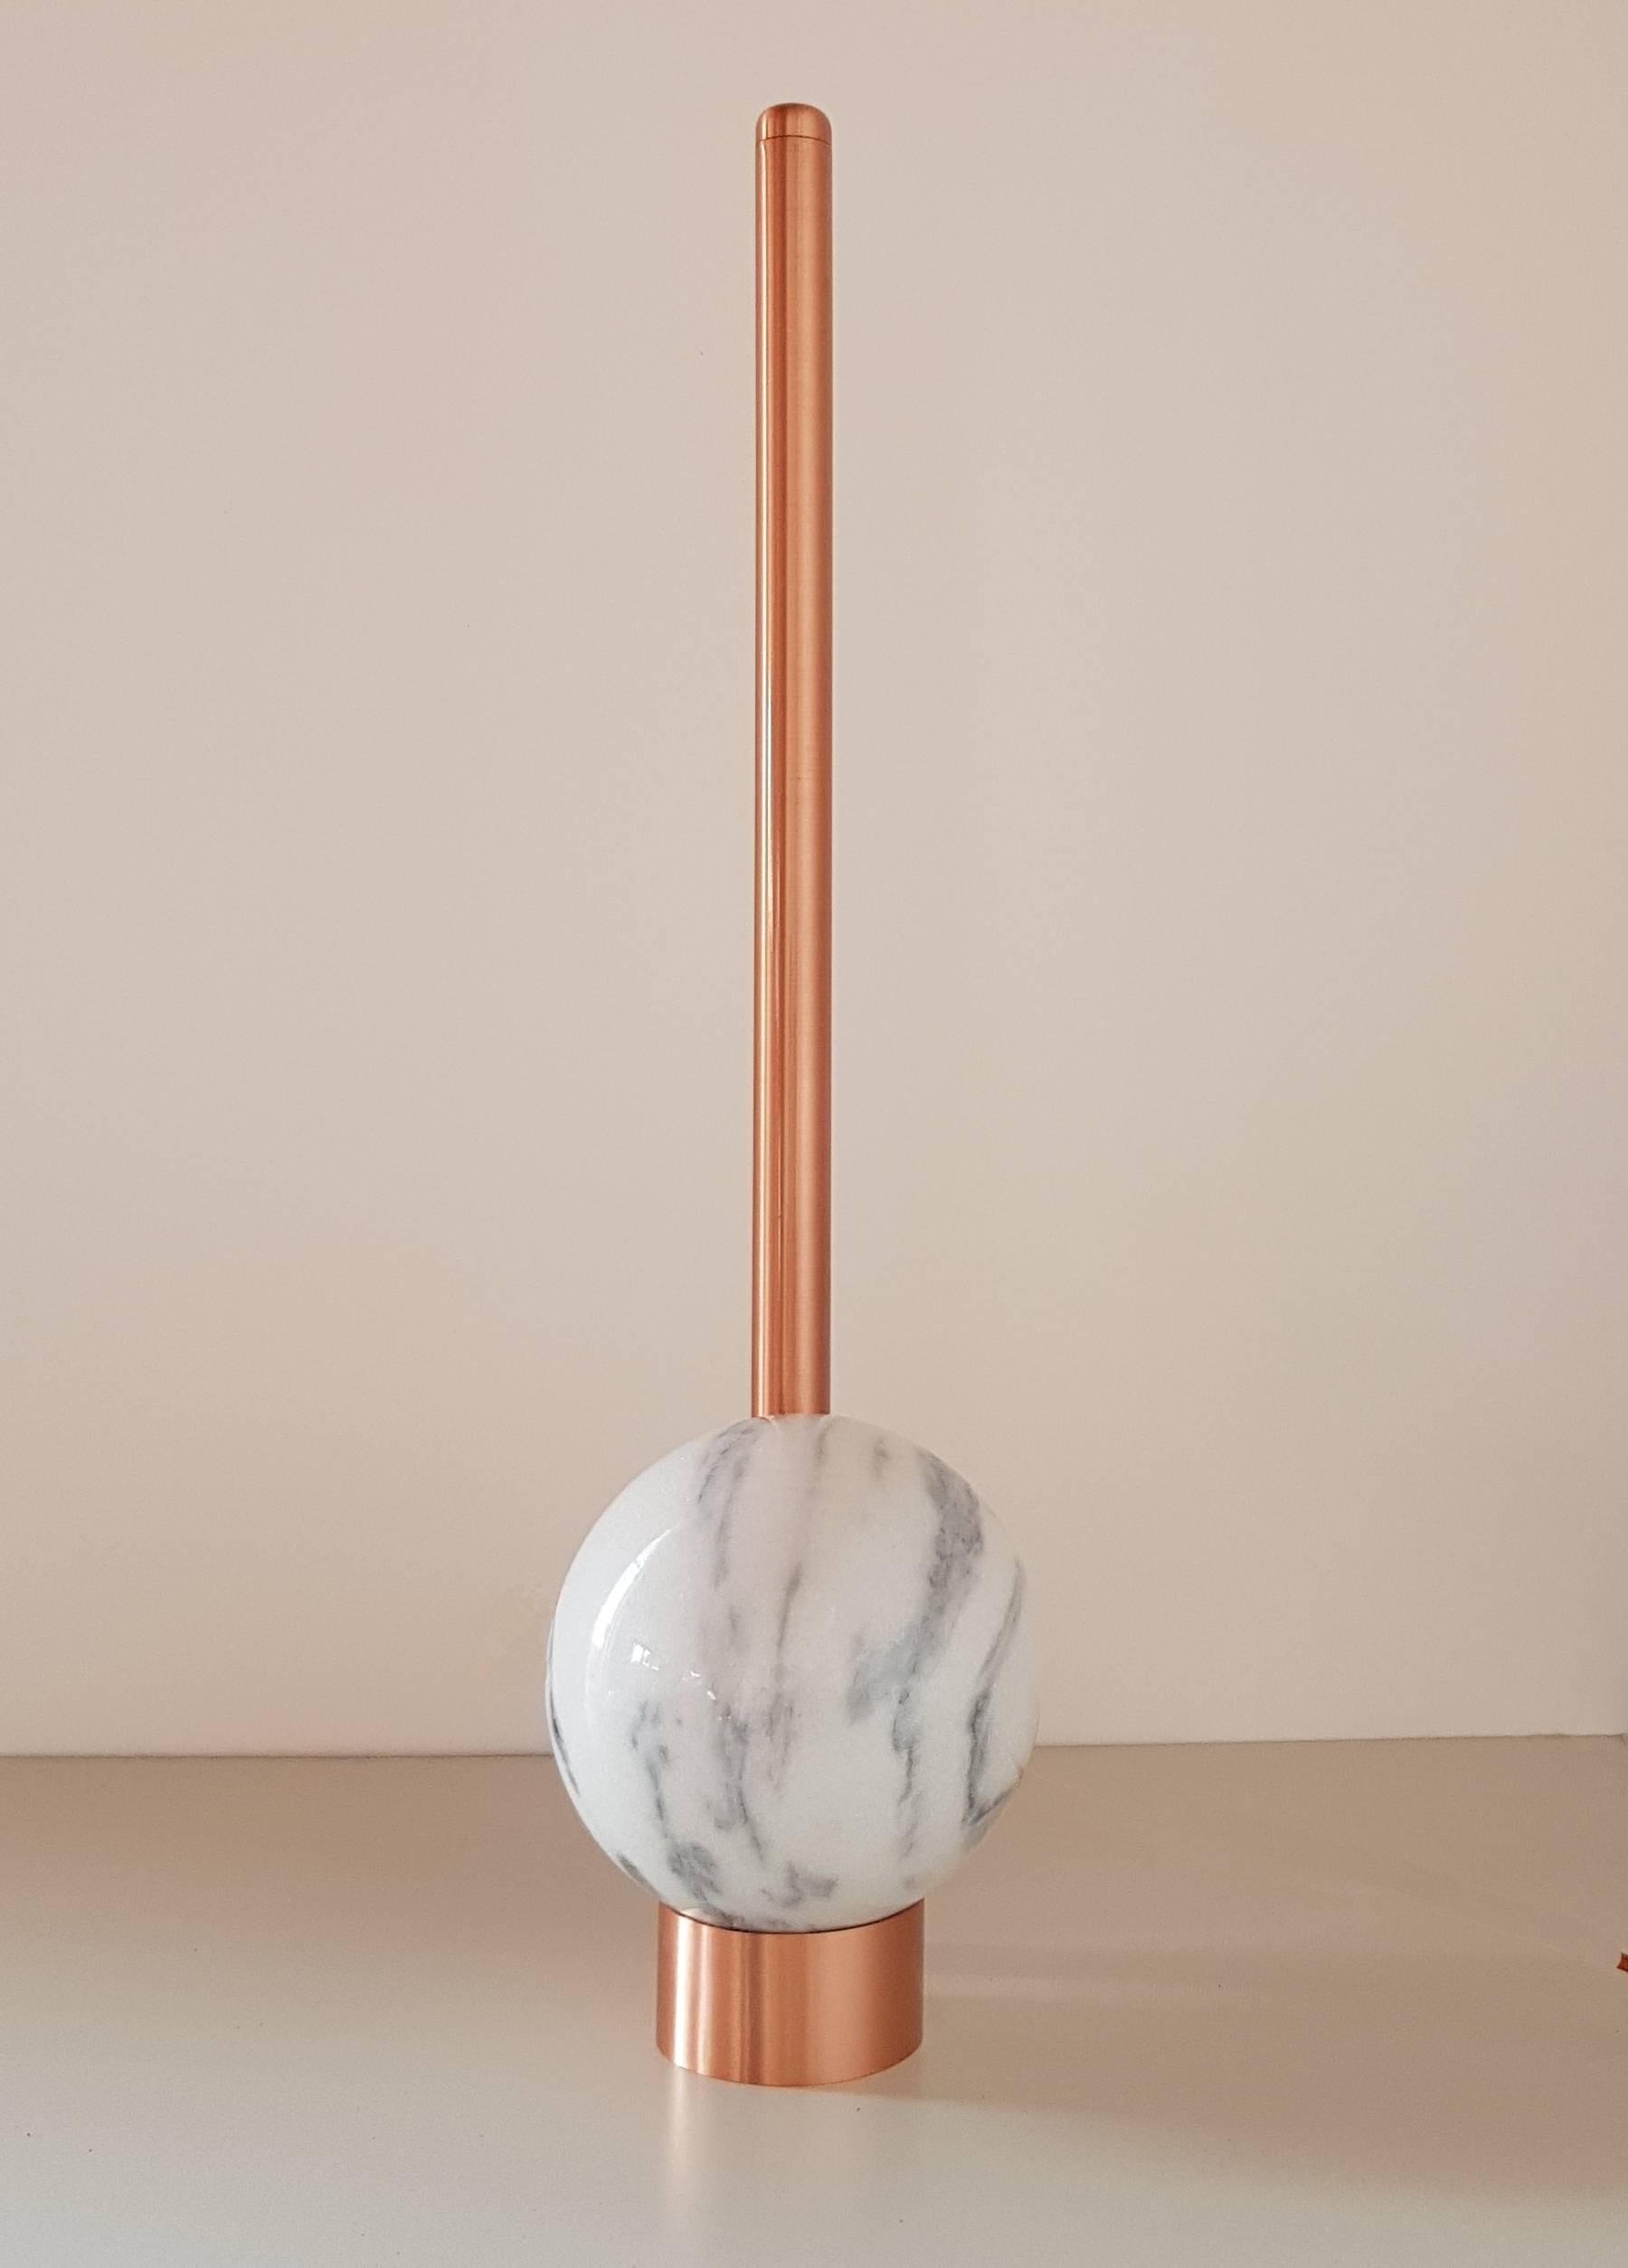 Polished 'Bubble' Table Lamp in Marble and Copper, Brazilian Contemporary Style